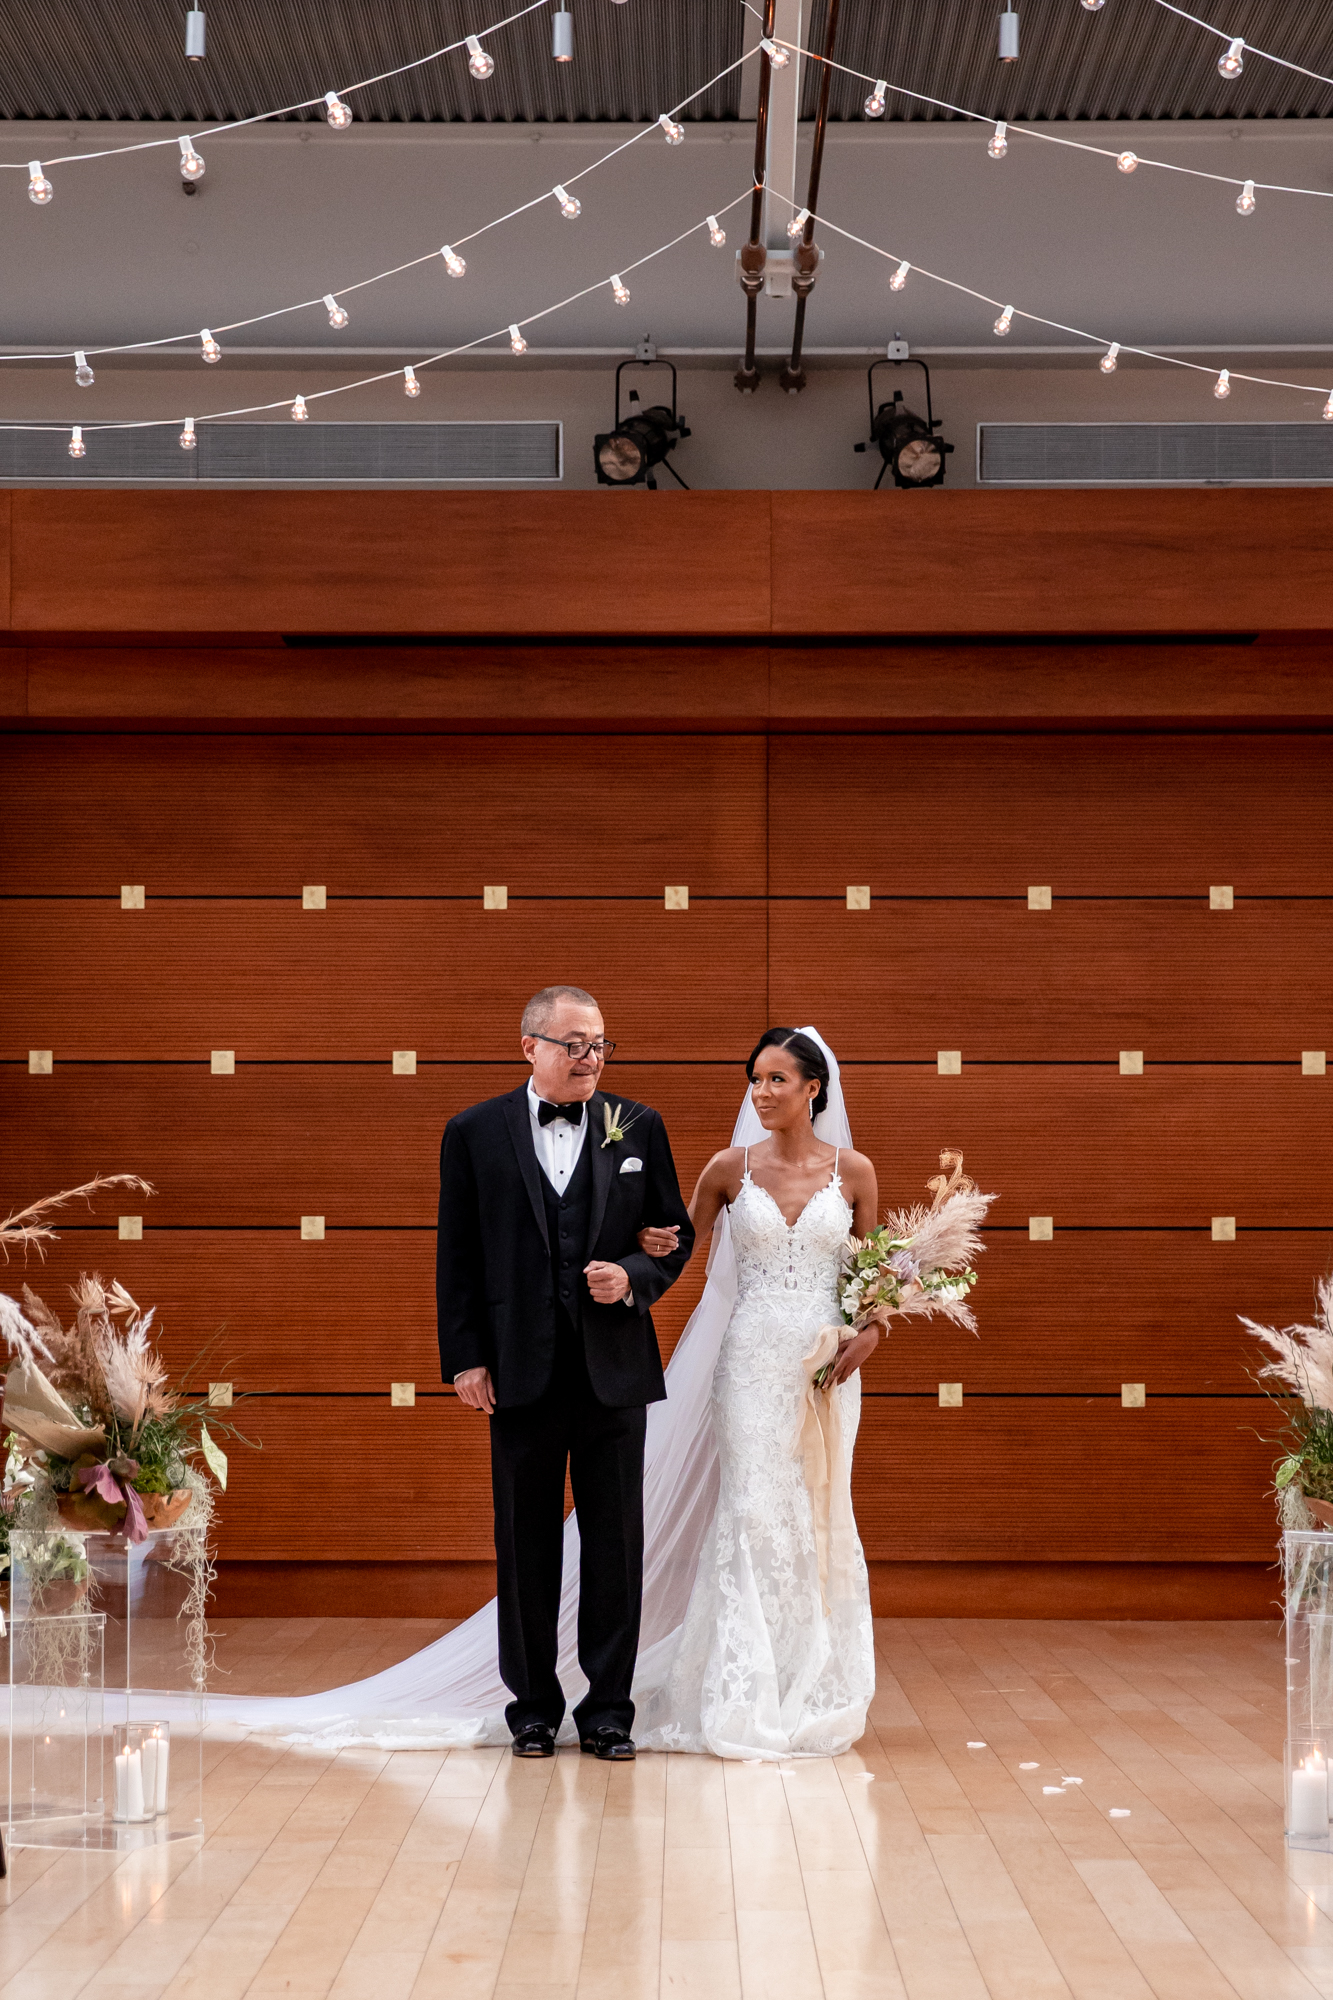 father walking the bride down the aisle at a kimmel center wedding